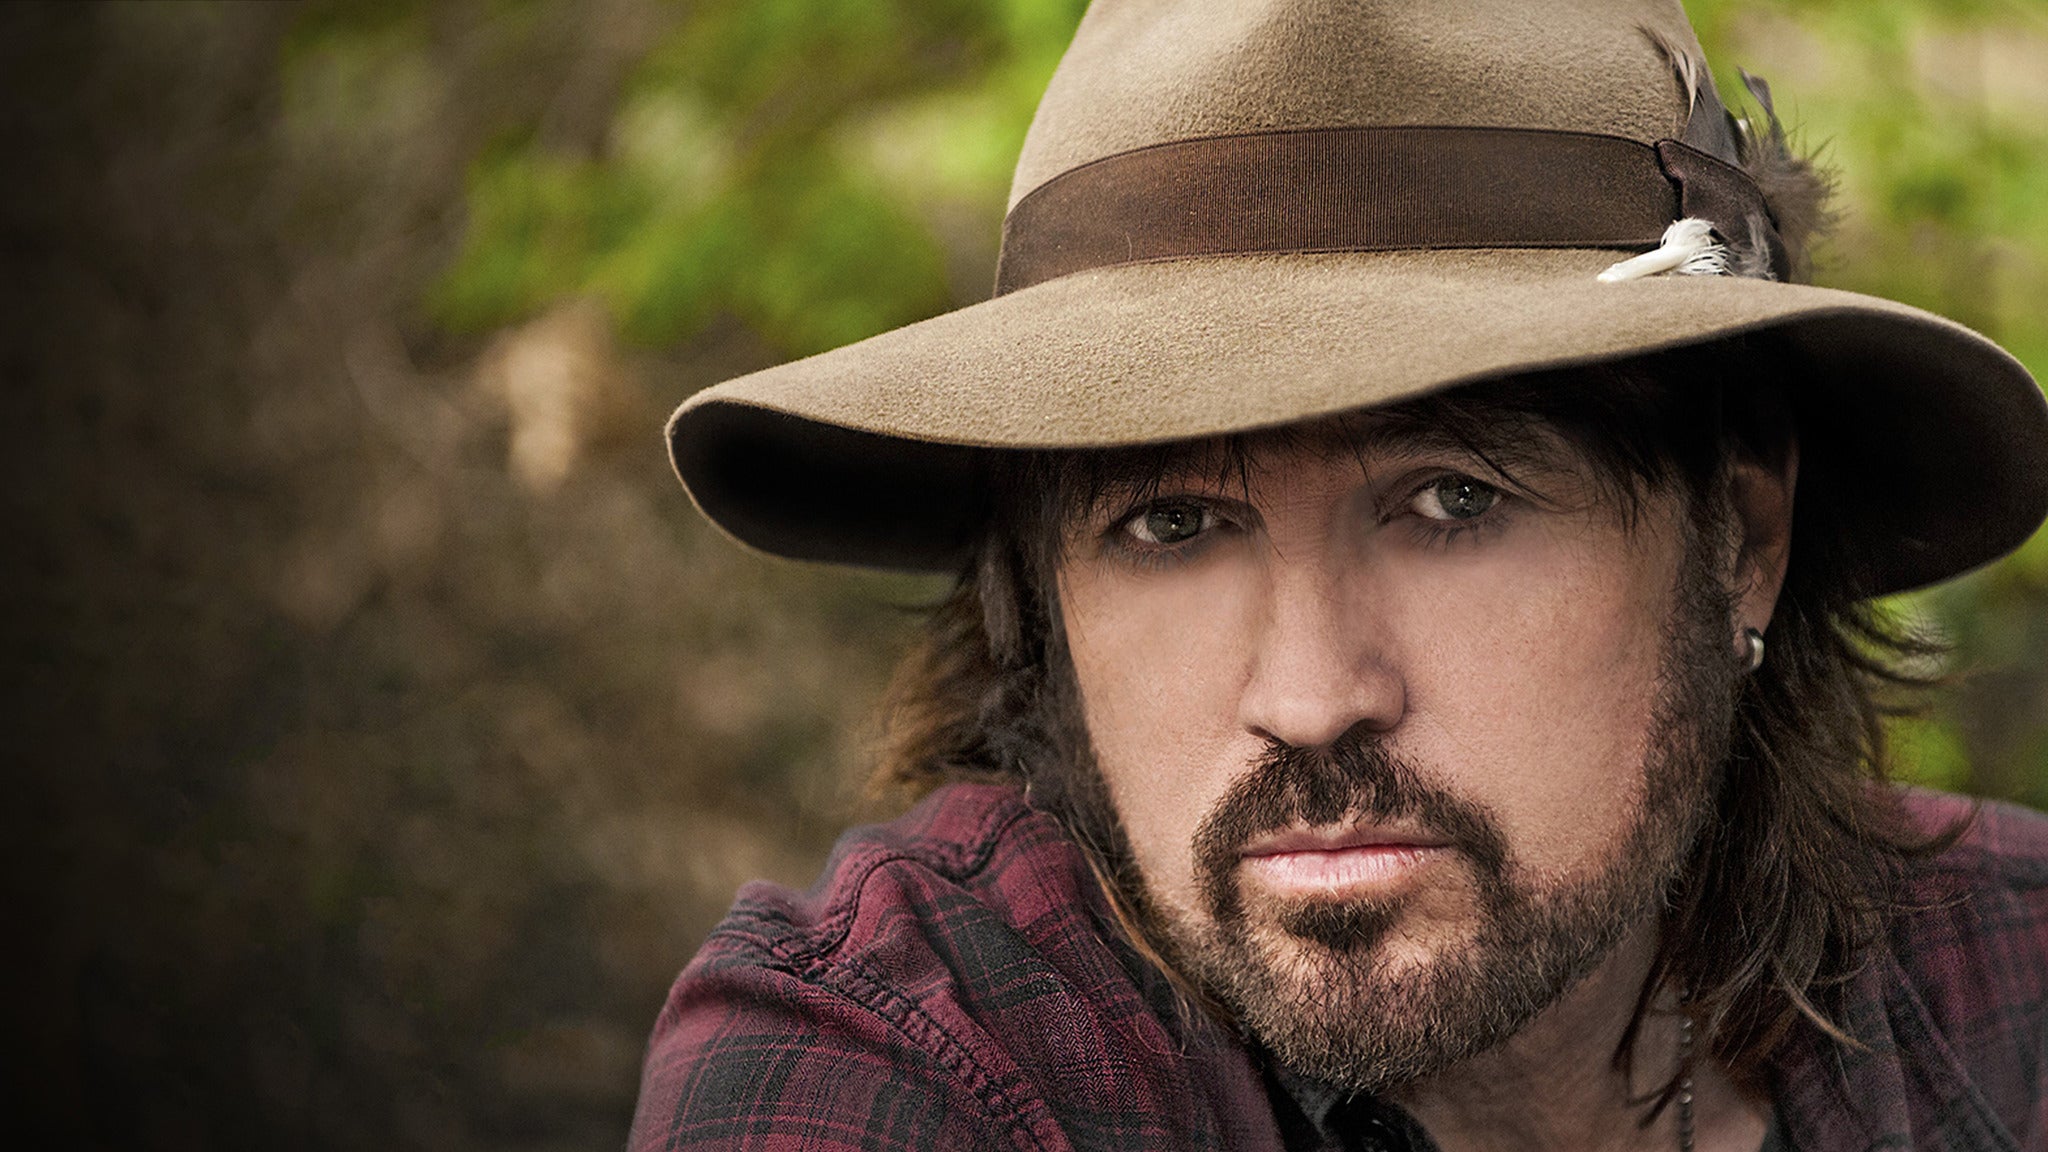 Country bill. Billy ray Cyrus.